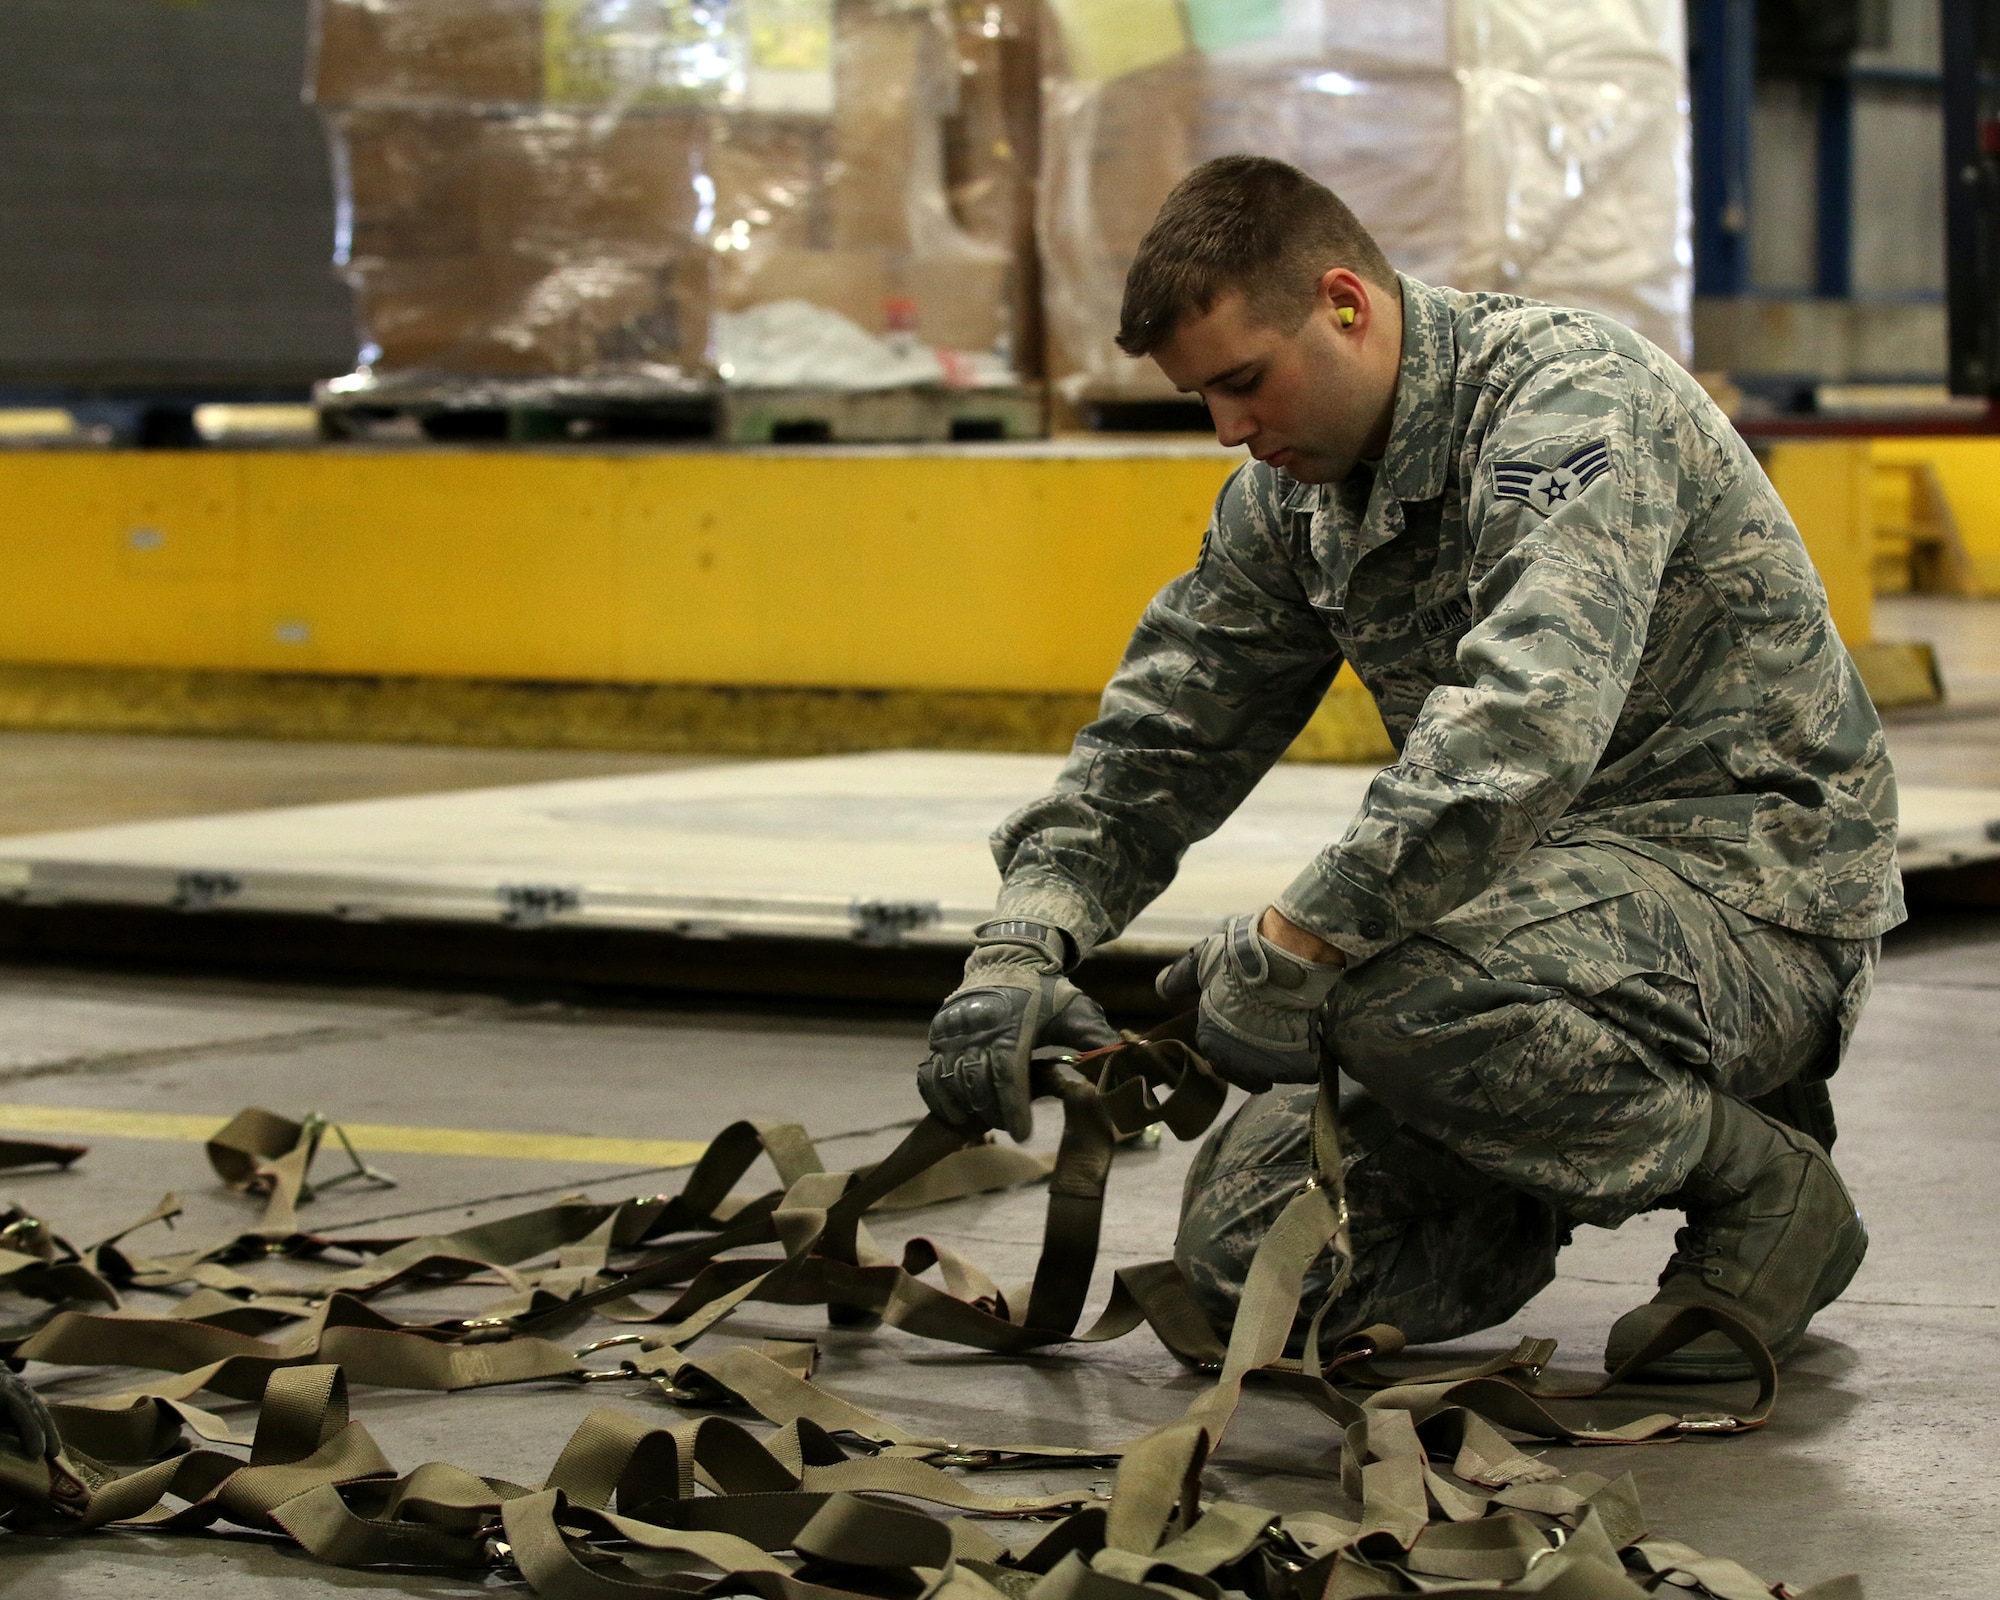 WRIGHT-PATTERSON AIR FORCE BASE, Ohio – Senior Airman Kasch M. McInnis, 87th Aerial Port Squadron air transportation apprentice, prepares cargo straps for pallets simulated for transportation by a C-17 Globemaster III during training held on the Nov. 6, 2015 unit training assembly. (U.S. Air Force photo /Tech. Sgt. Patrick O’Reilly)